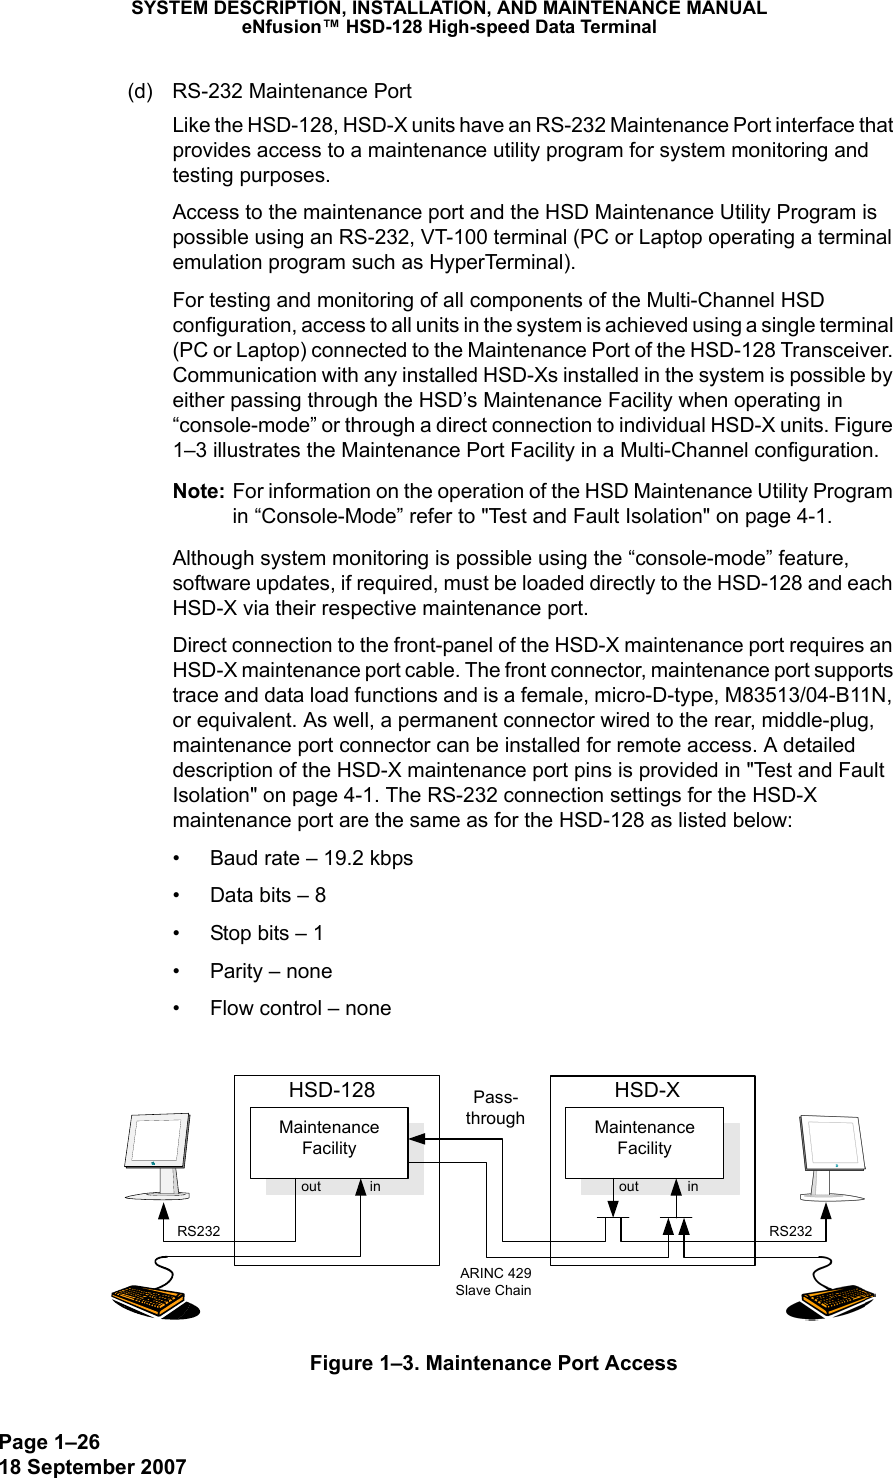 Page 1–2618 September 2007SYSTEM DESCRIPTION, INSTALLATION, AND MAINTENANCE MANUALeNfusion™ HSD-128 High-speed Data Terminal(d) RS-232 Maintenance Port Like the HSD-128, HSD-X units have an RS-232 Maintenance Port interface that provides access to a maintenance utility program for system monitoring and testing purposes. Access to the maintenance port and the HSD Maintenance Utility Program is possible using an RS-232, VT-100 terminal (PC or Laptop operating a terminal emulation program such as HyperTerminal). For testing and monitoring of all components of the Multi-Channel HSD configuration, access to all units in the system is achieved using a single terminal (PC or Laptop) connected to the Maintenance Port of the HSD-128 Transceiver. Communication with any installed HSD-Xs installed in the system is possible by either passing through the HSD’s Maintenance Facility when operating in “console-mode” or through a direct connection to individual HSD-X units. Figure 1–3 illustrates the Maintenance Port Facility in a Multi-Channel configuration.Note: For information on the operation of the HSD Maintenance Utility Program in “Console-Mode” refer to &quot;Test and Fault Isolation&quot; on page 4-1. Although system monitoring is possible using the “console-mode” feature, software updates, if required, must be loaded directly to the HSD-128 and each HSD-X via their respective maintenance port. Direct connection to the front-panel of the HSD-X maintenance port requires an HSD-X maintenance port cable. The front connector, maintenance port supports trace and data load functions and is a female, micro-D-type, M83513/04-B11N, or equivalent. As well, a permanent connector wired to the rear, middle-plug, maintenance port connector can be installed for remote access. A detailed description of the HSD-X maintenance port pins is provided in &quot;Test and Fault Isolation&quot; on page 4-1. The RS-232 connection settings for the HSD-X maintenance port are the same as for the HSD-128 as listed below: • Baud rate – 19.2 kbps• Data bits – 8• Stop bits – 1• Parity – none• Flow control – noneFigure 1–3. Maintenance Port AccessMaintenanceFacilityHSD-128MaintenanceFacilityHSD-XPass-throughout inout inARINC 429Slave ChainRS232 RS232